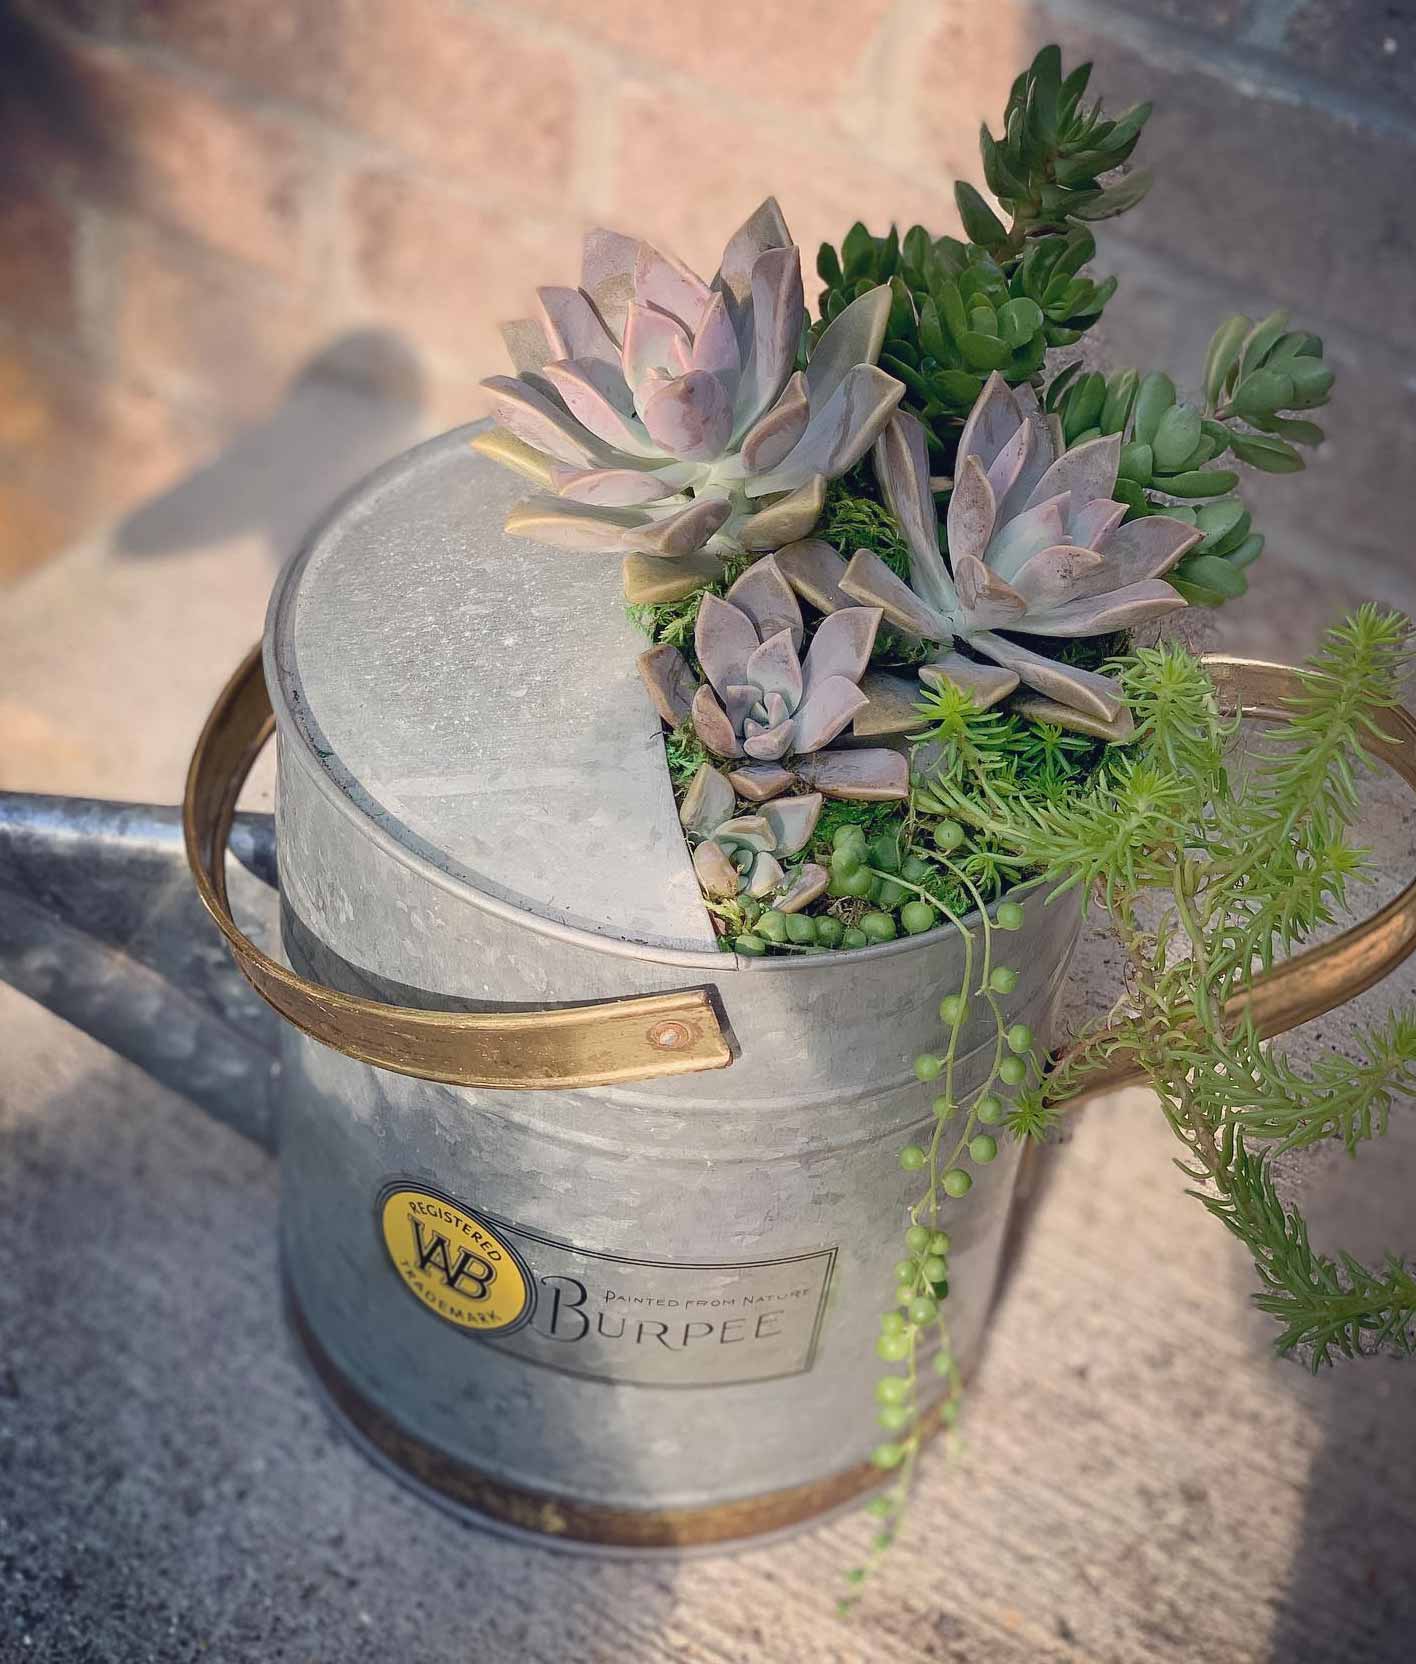 Repurposed an old metal watering can into a flower pot